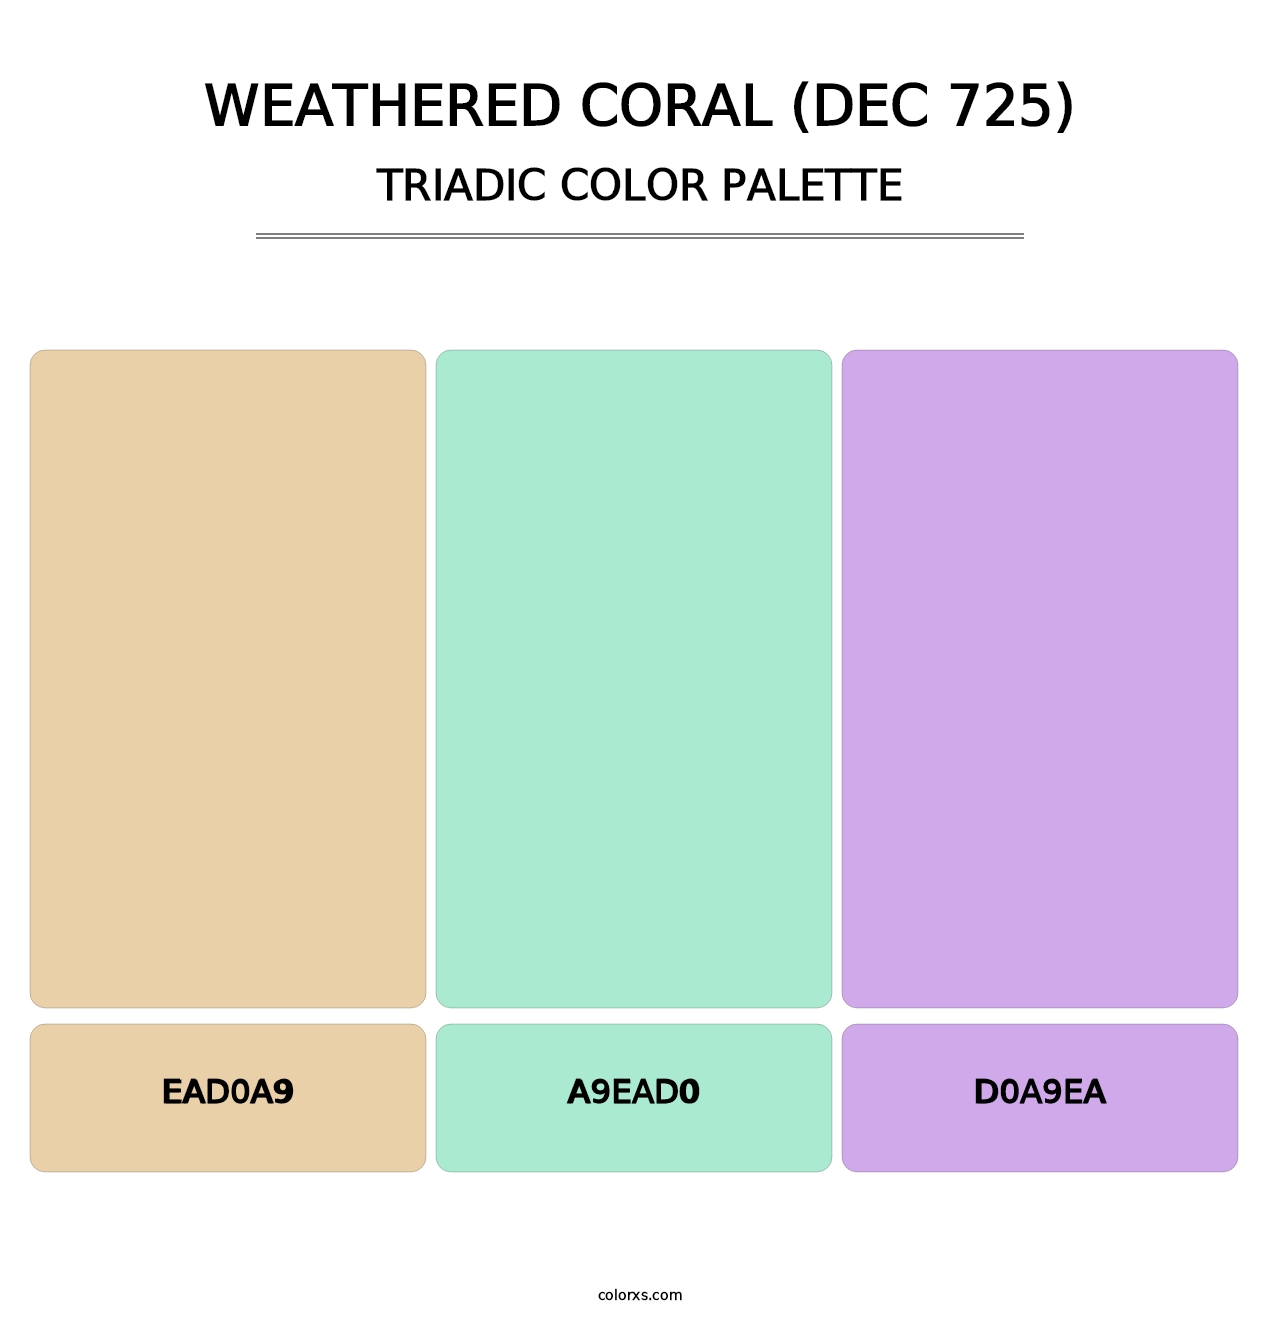 Weathered Coral (DEC 725) - Triadic Color Palette